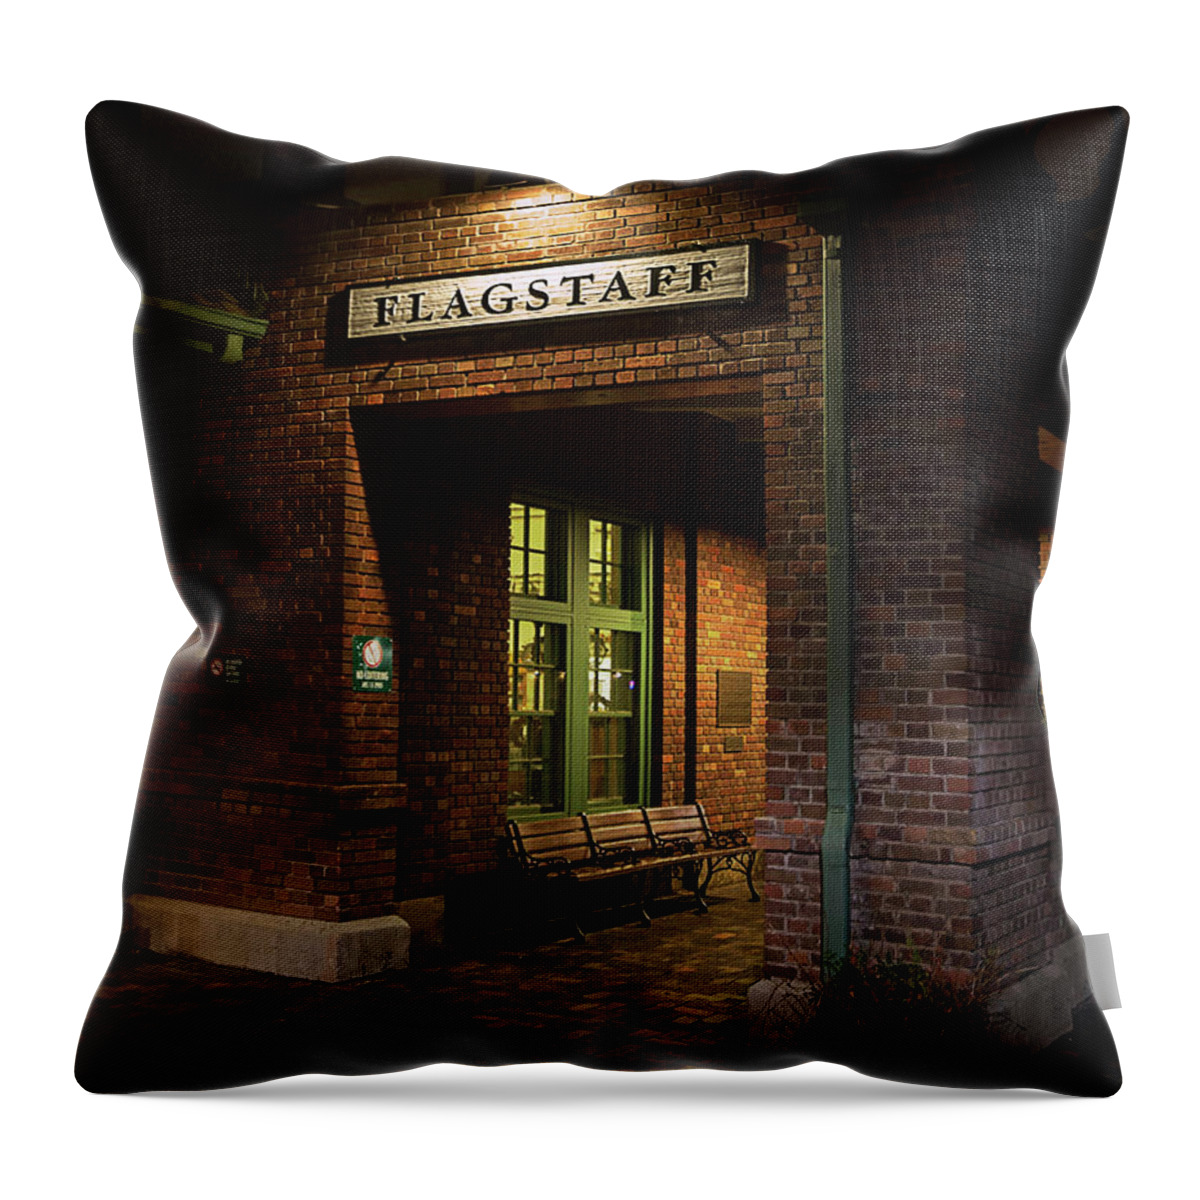 Flag Throw Pillow featuring the photograph Flagstaff Rail Station Entry by American Landscapes